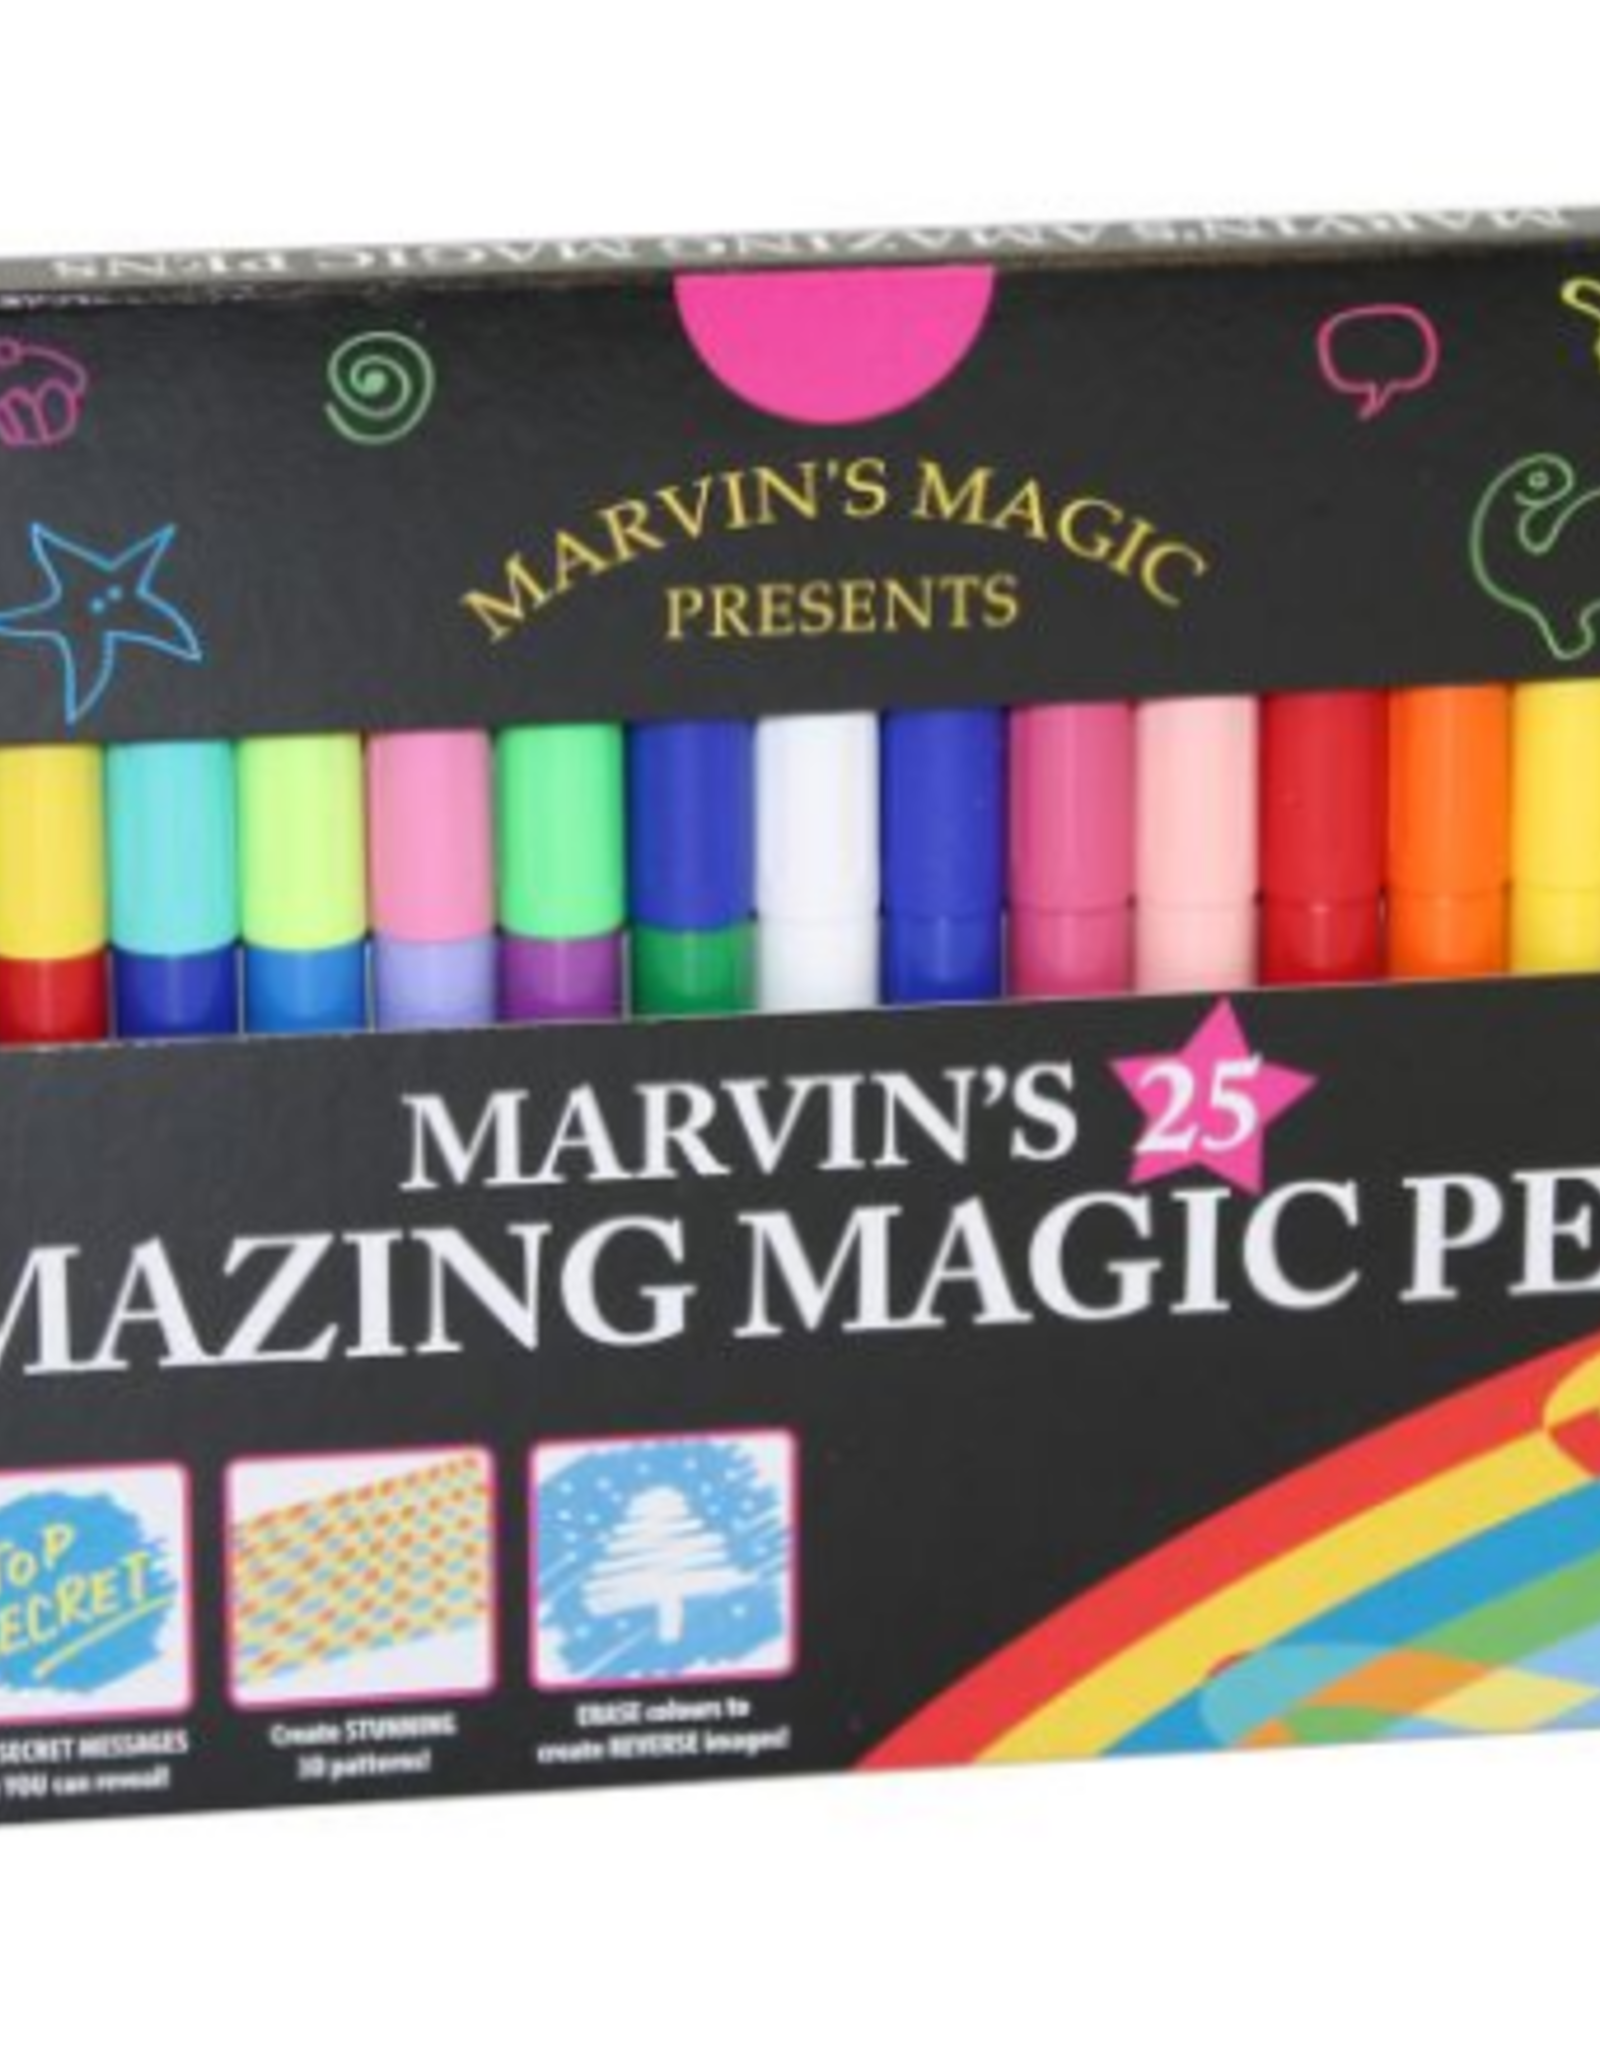 Marvin's Amazing Magic Pens (25 Pack) – Marvin's Magic Worldwide